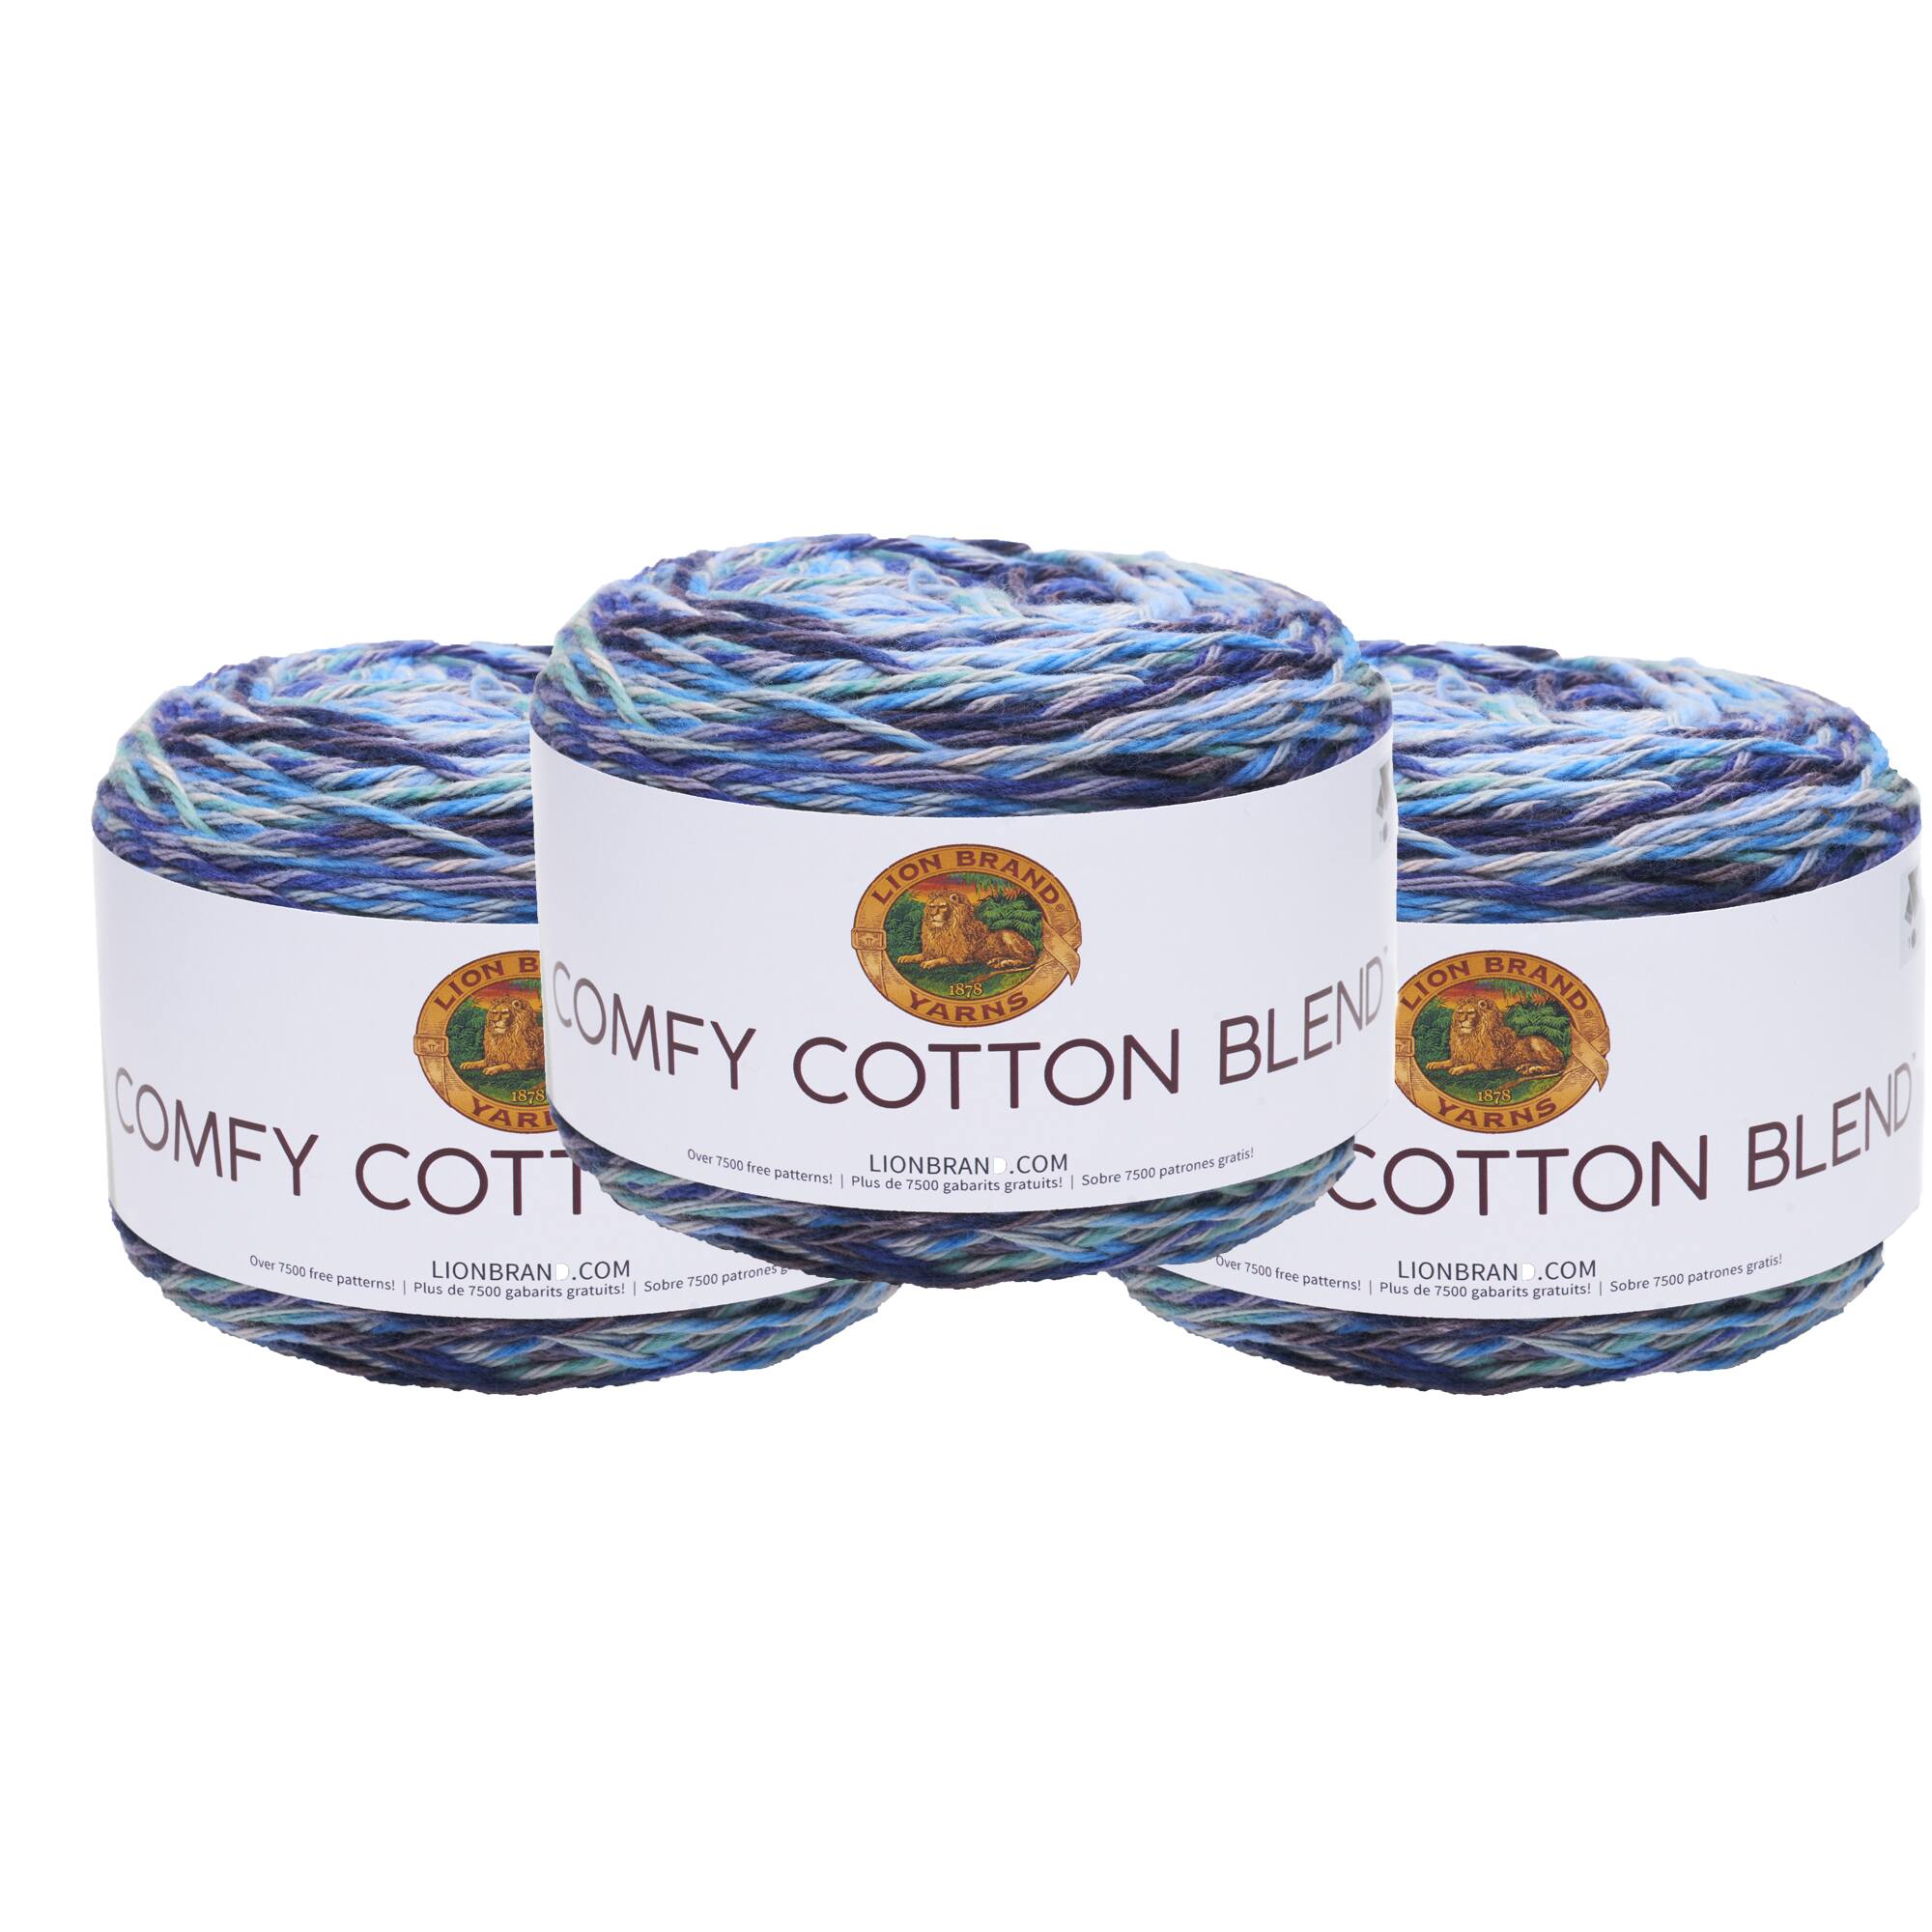 Lion Brand Comfy Cotton Blend, Cotton Yarn, Yarn for Home Decor